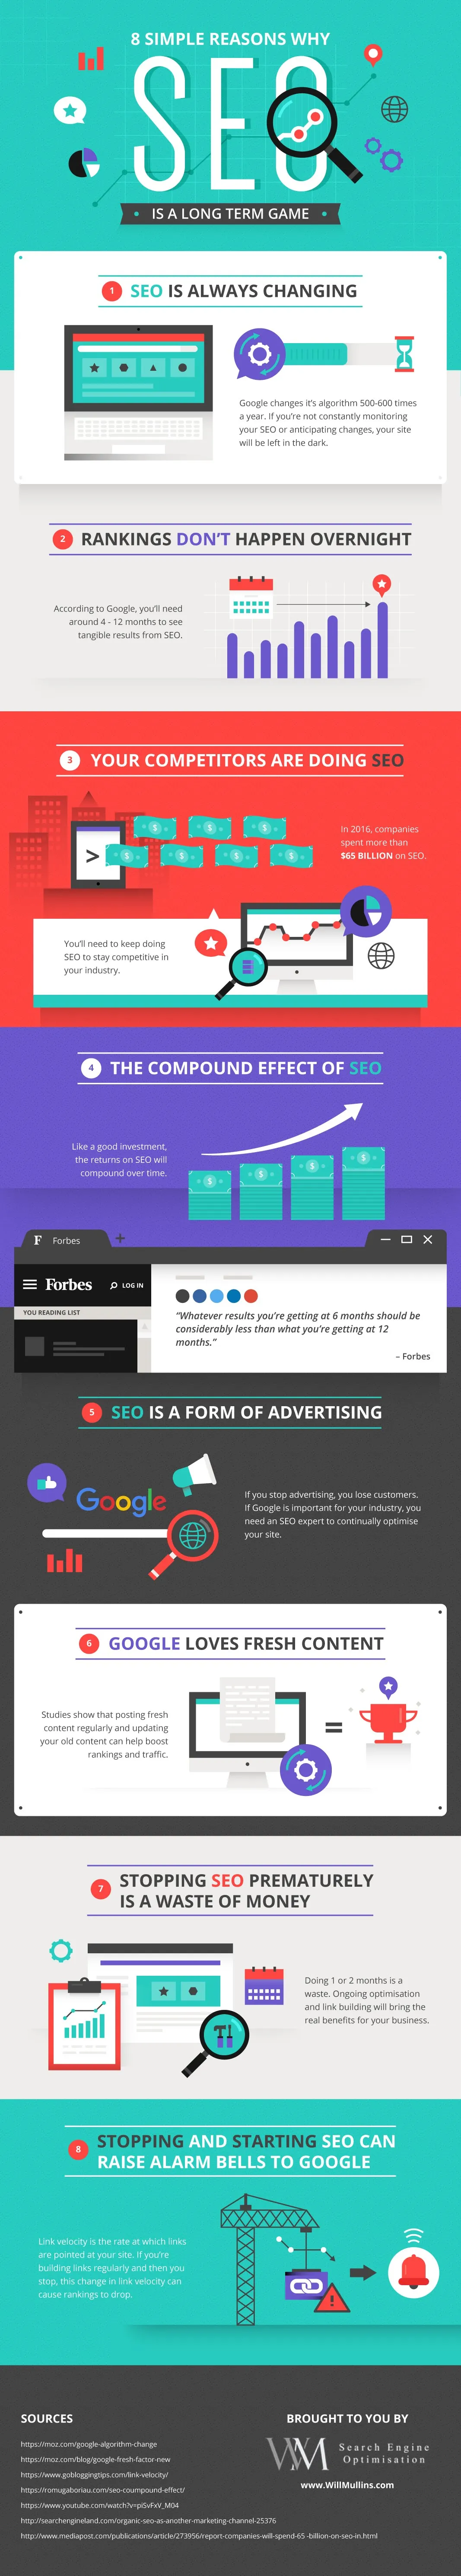 8 Simple Reasons Why SEO Is A Long Term Game - #infographic